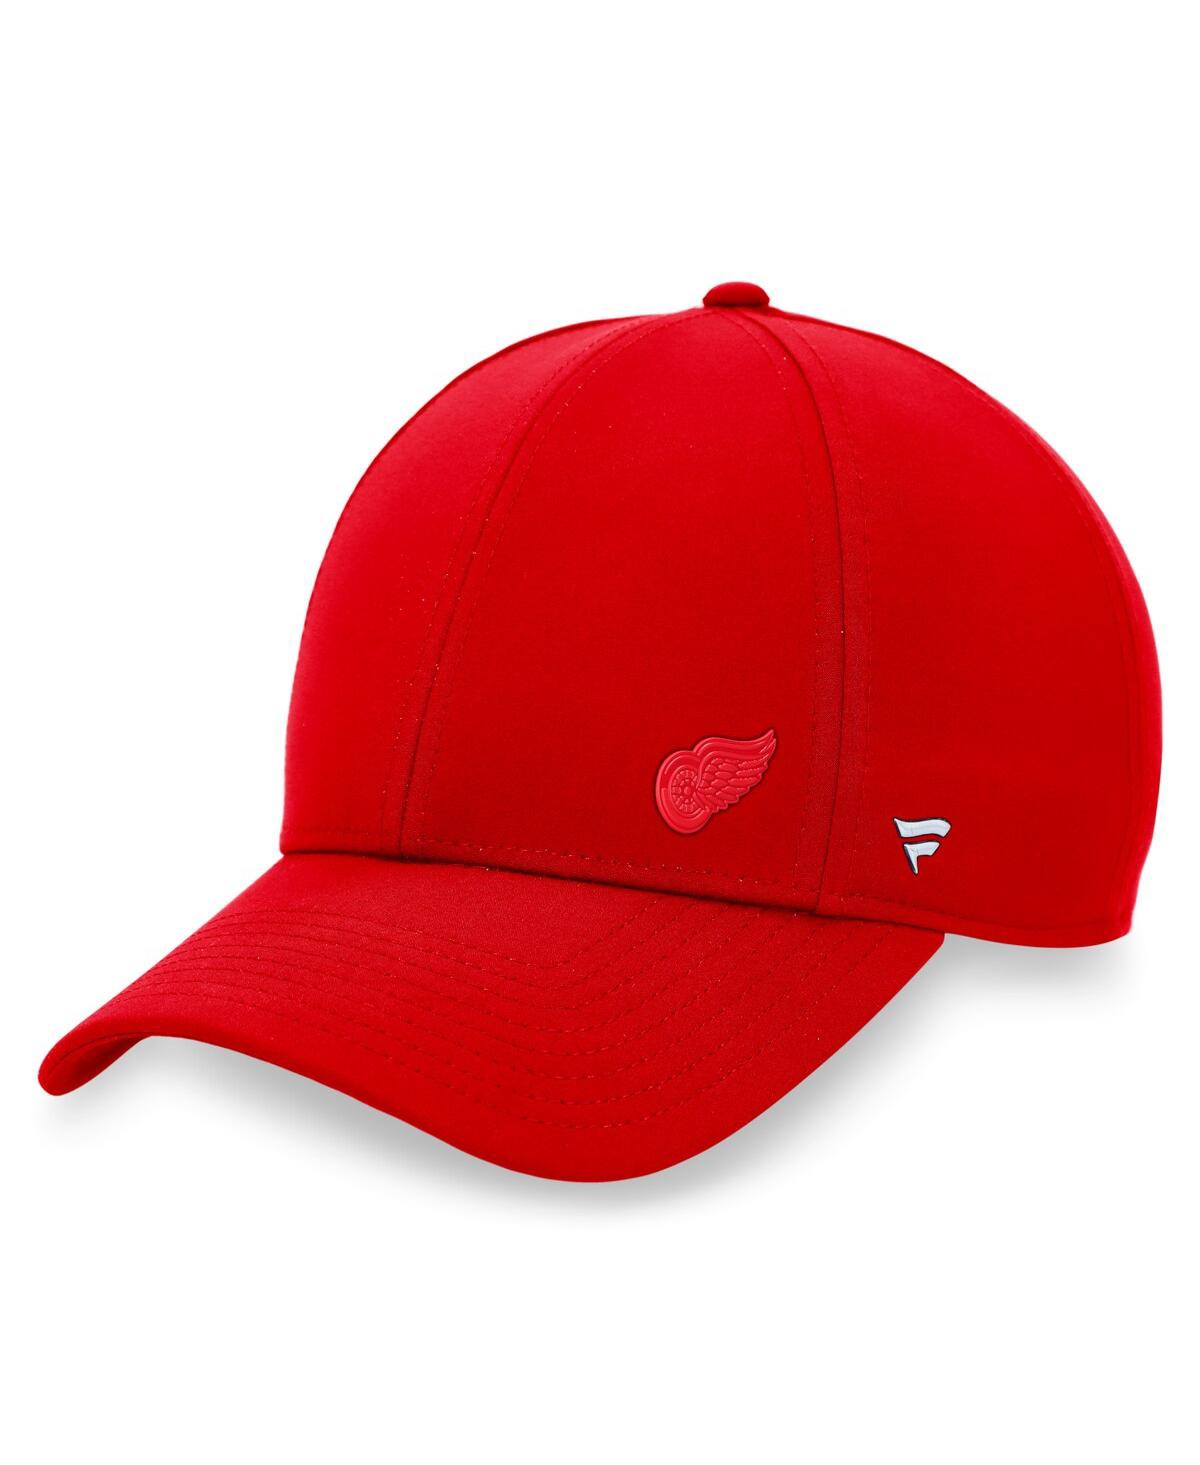 Women's Fanatics Red Detroit Red Wings Authentic Pro Road Structured Adjustable Hat - Red